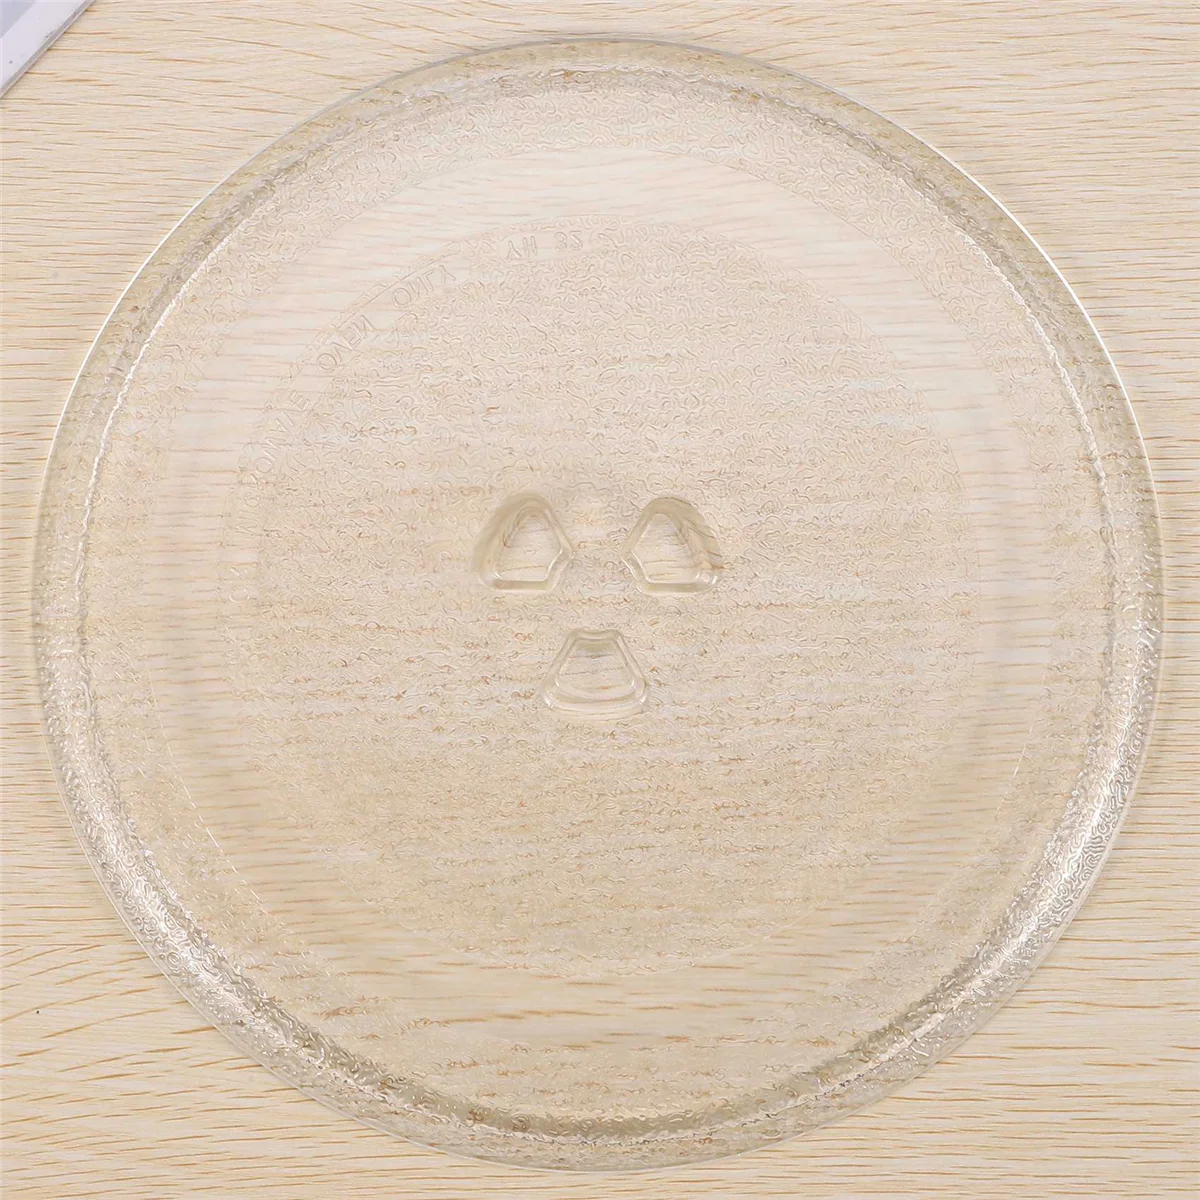 

9.6 Inch Microwave Plate Spare Microwave Dish Durable Universal Microwave Turntable Glass Plates Round Replacement Plate